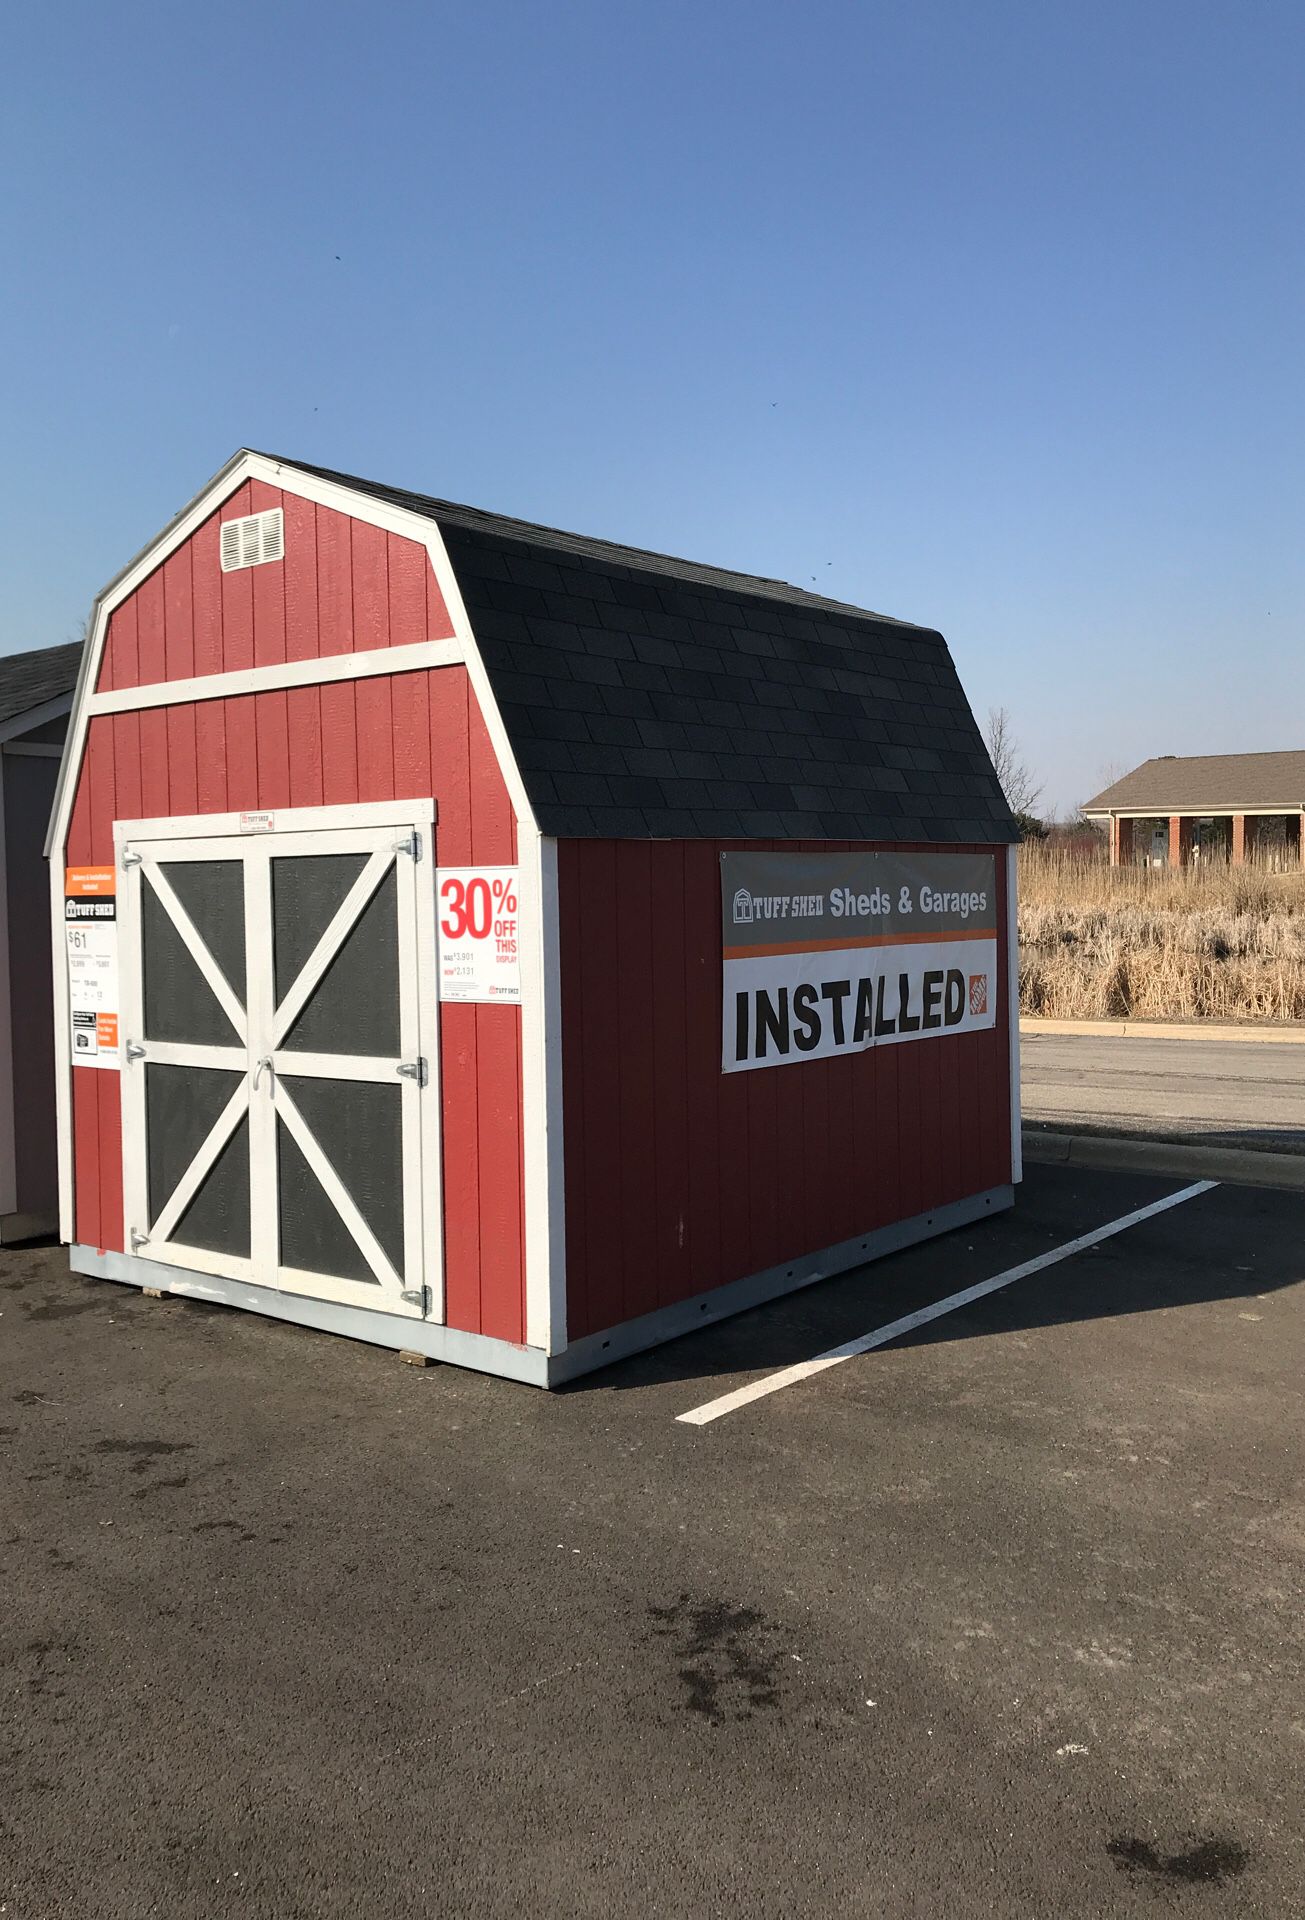 Tuff Shed TB600 10x12 Was: $3901 Now: $2131